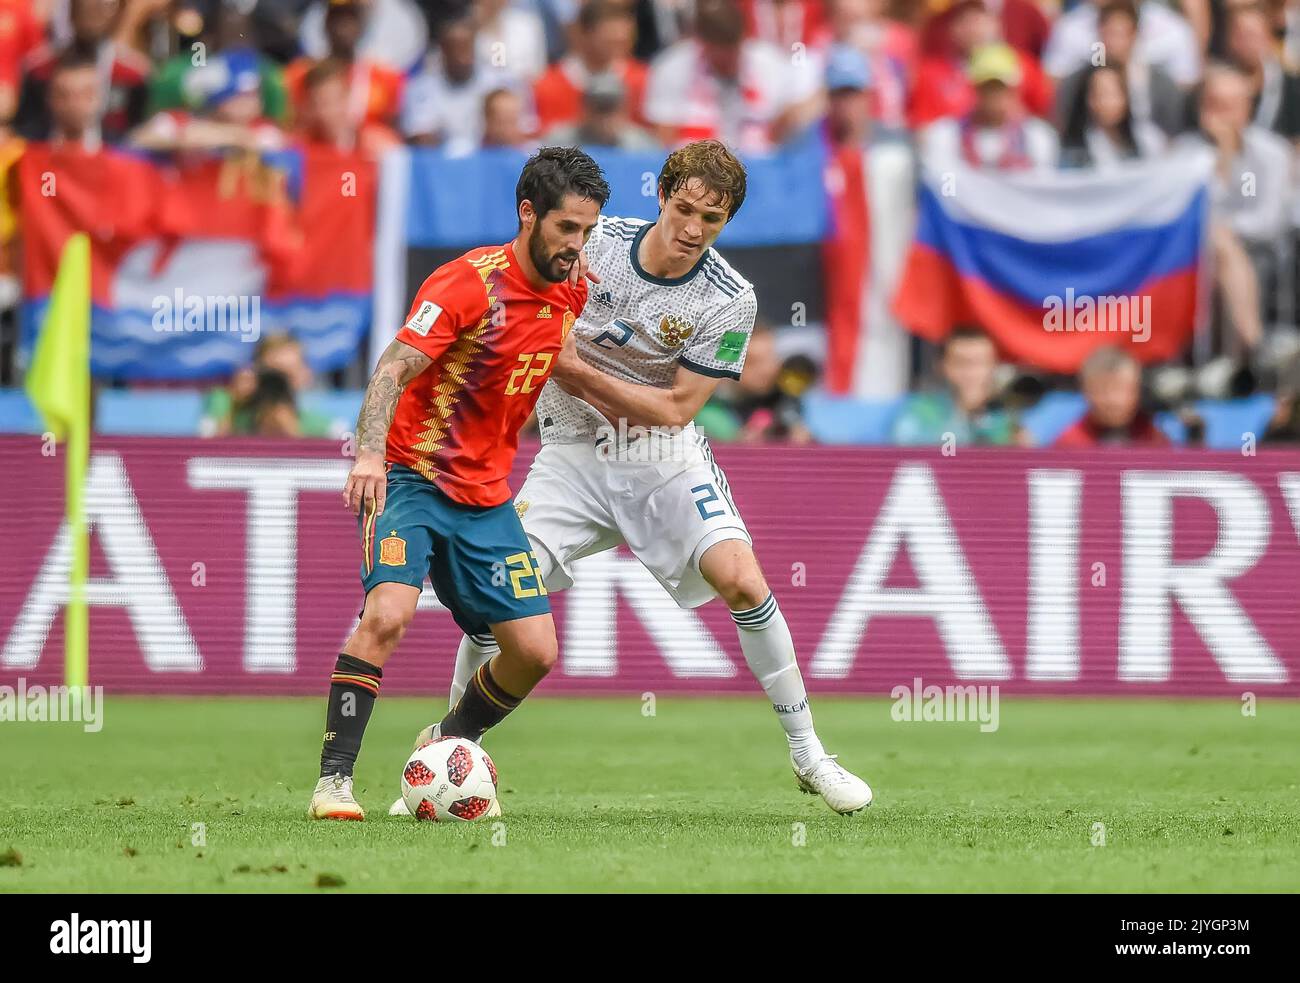 Moscow, Russia - July 1, 2018. Spain national football team midfielder Isco against Russia defender Mario Fernandes during FIFA World Cup 2018 Round o Stock Photo